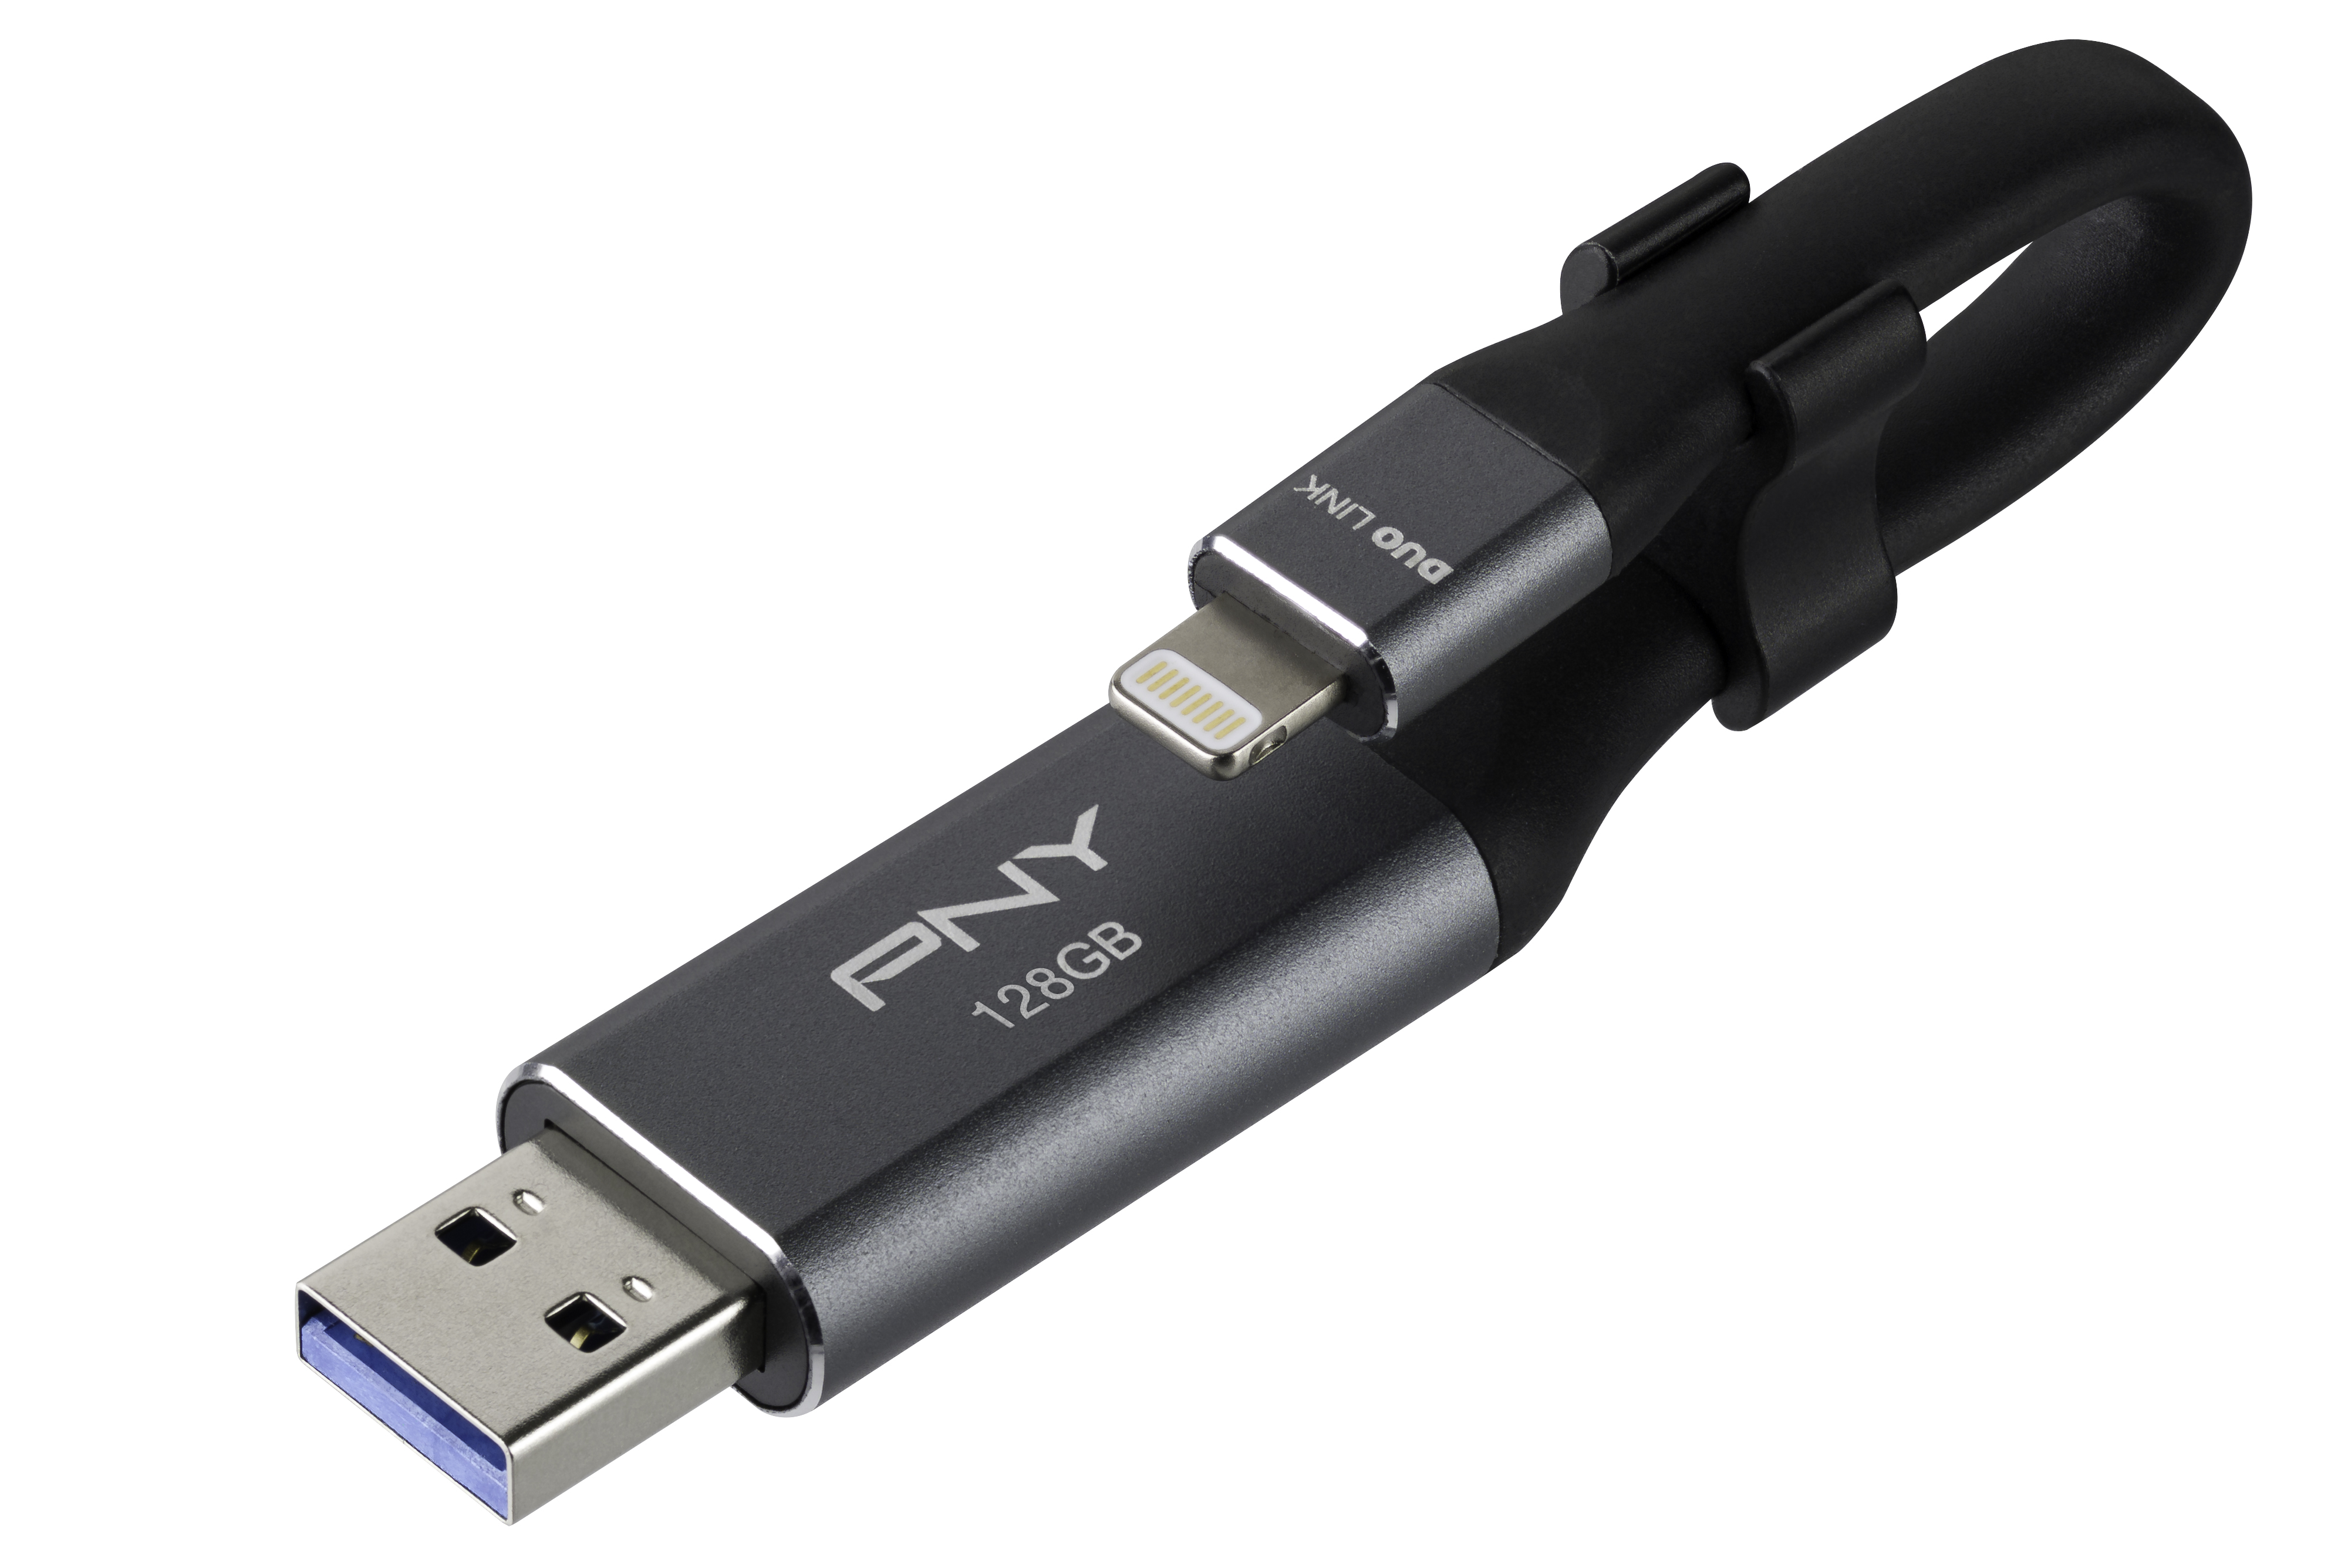 PNY 128GB DUO LINK USB 3.0 OTG Flash Drive for IPhone and I Pad (P-FDI128LA02GC-RB) - image 1 of 7